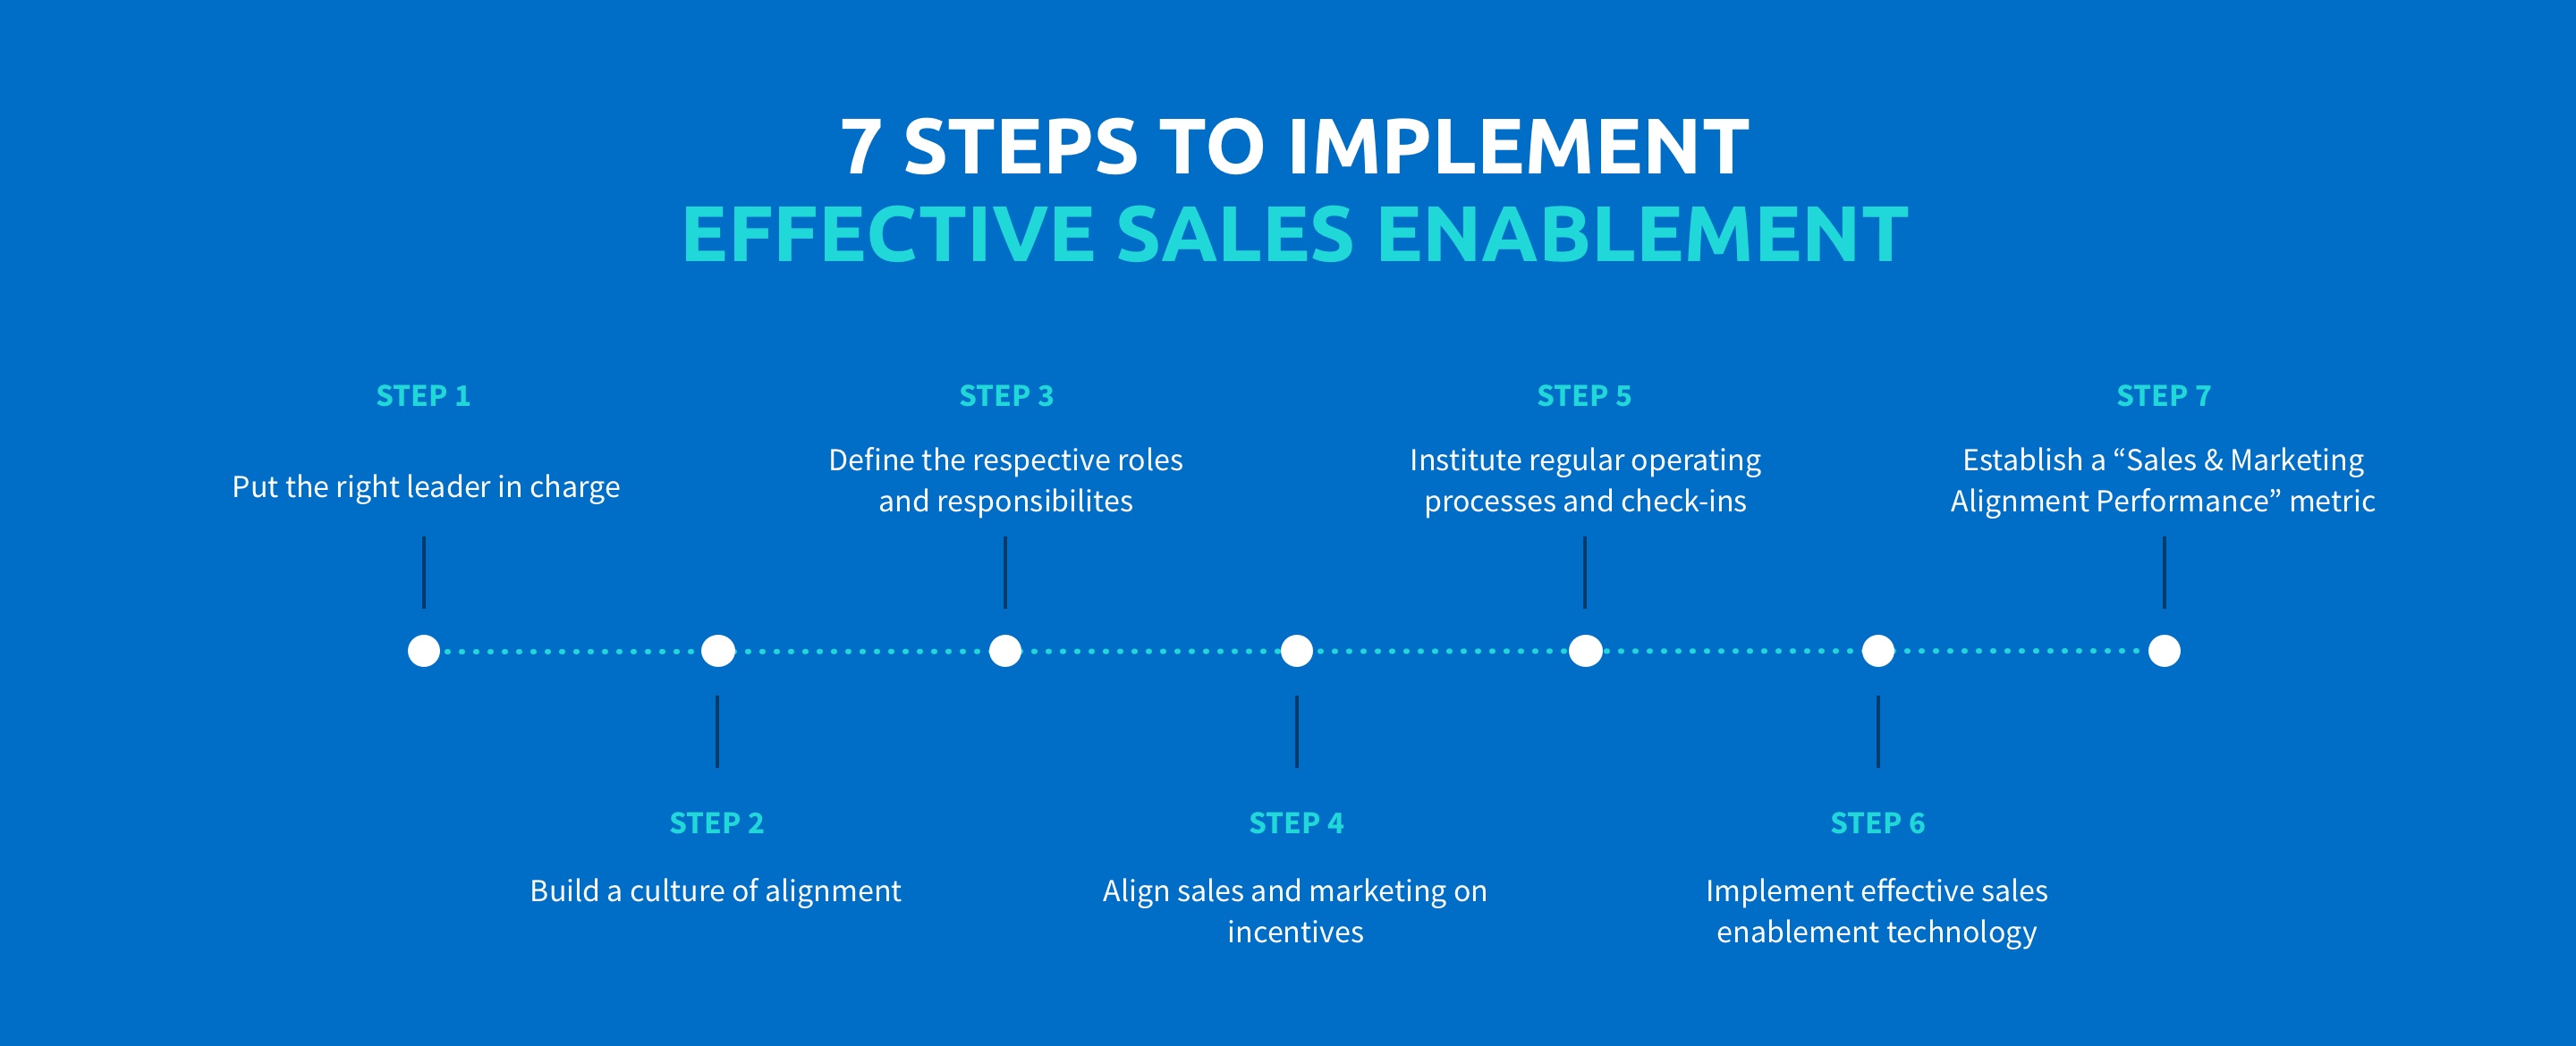 getting started with sales enablement